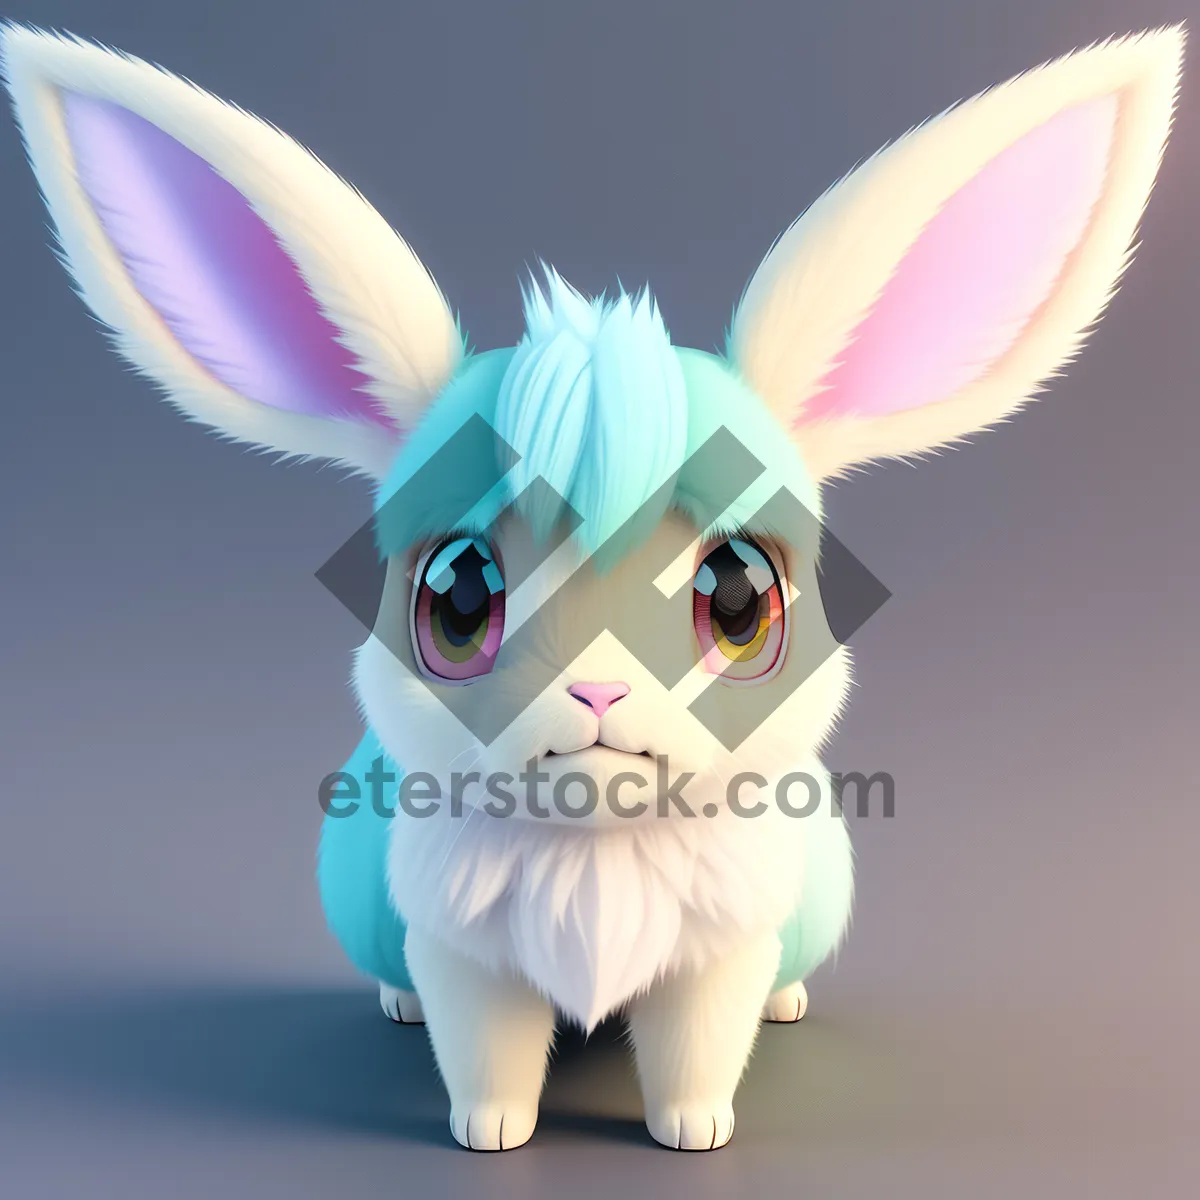 Picture of Cute Bunny Cartoon Artwork with Funny Ears